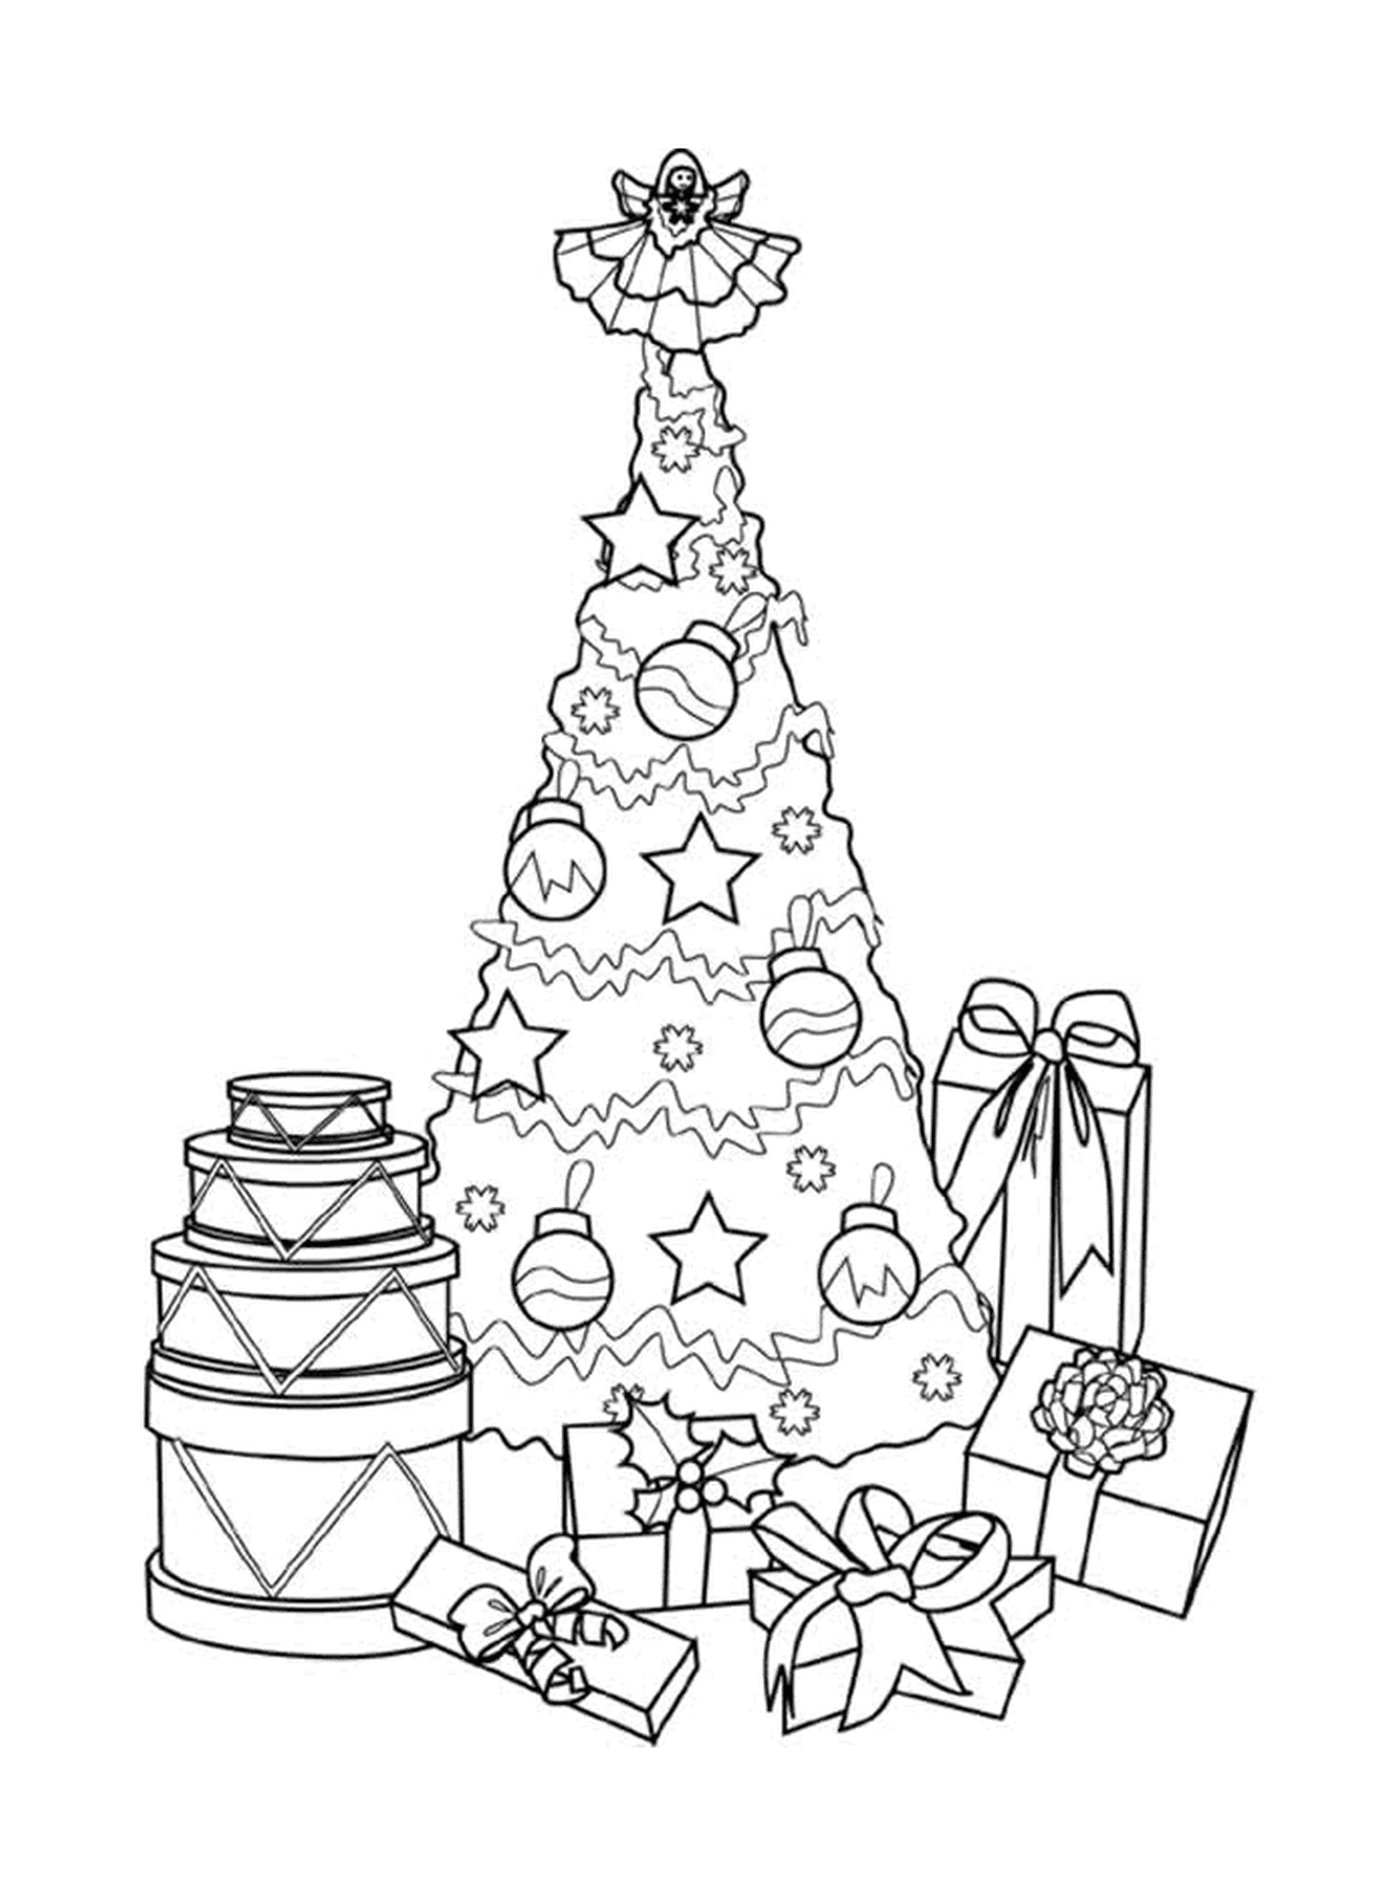  A Christmas tree surrounded by gifts 